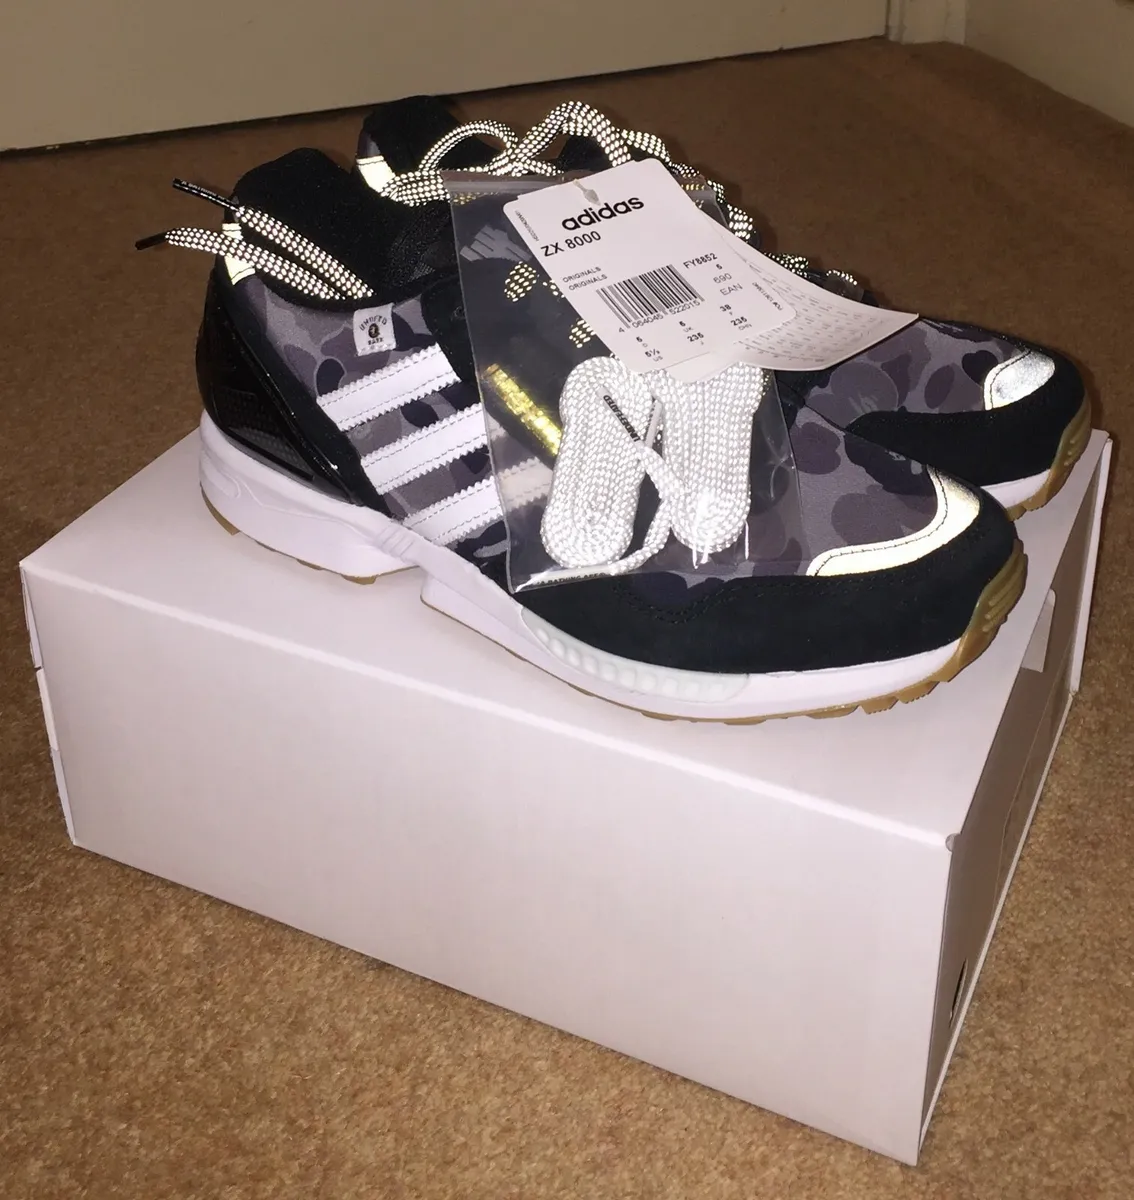 Adidas ZX 8000 Bape Undefeated BLACK Size 5 UK NEW IN BOX! 100% AUTHENTIC